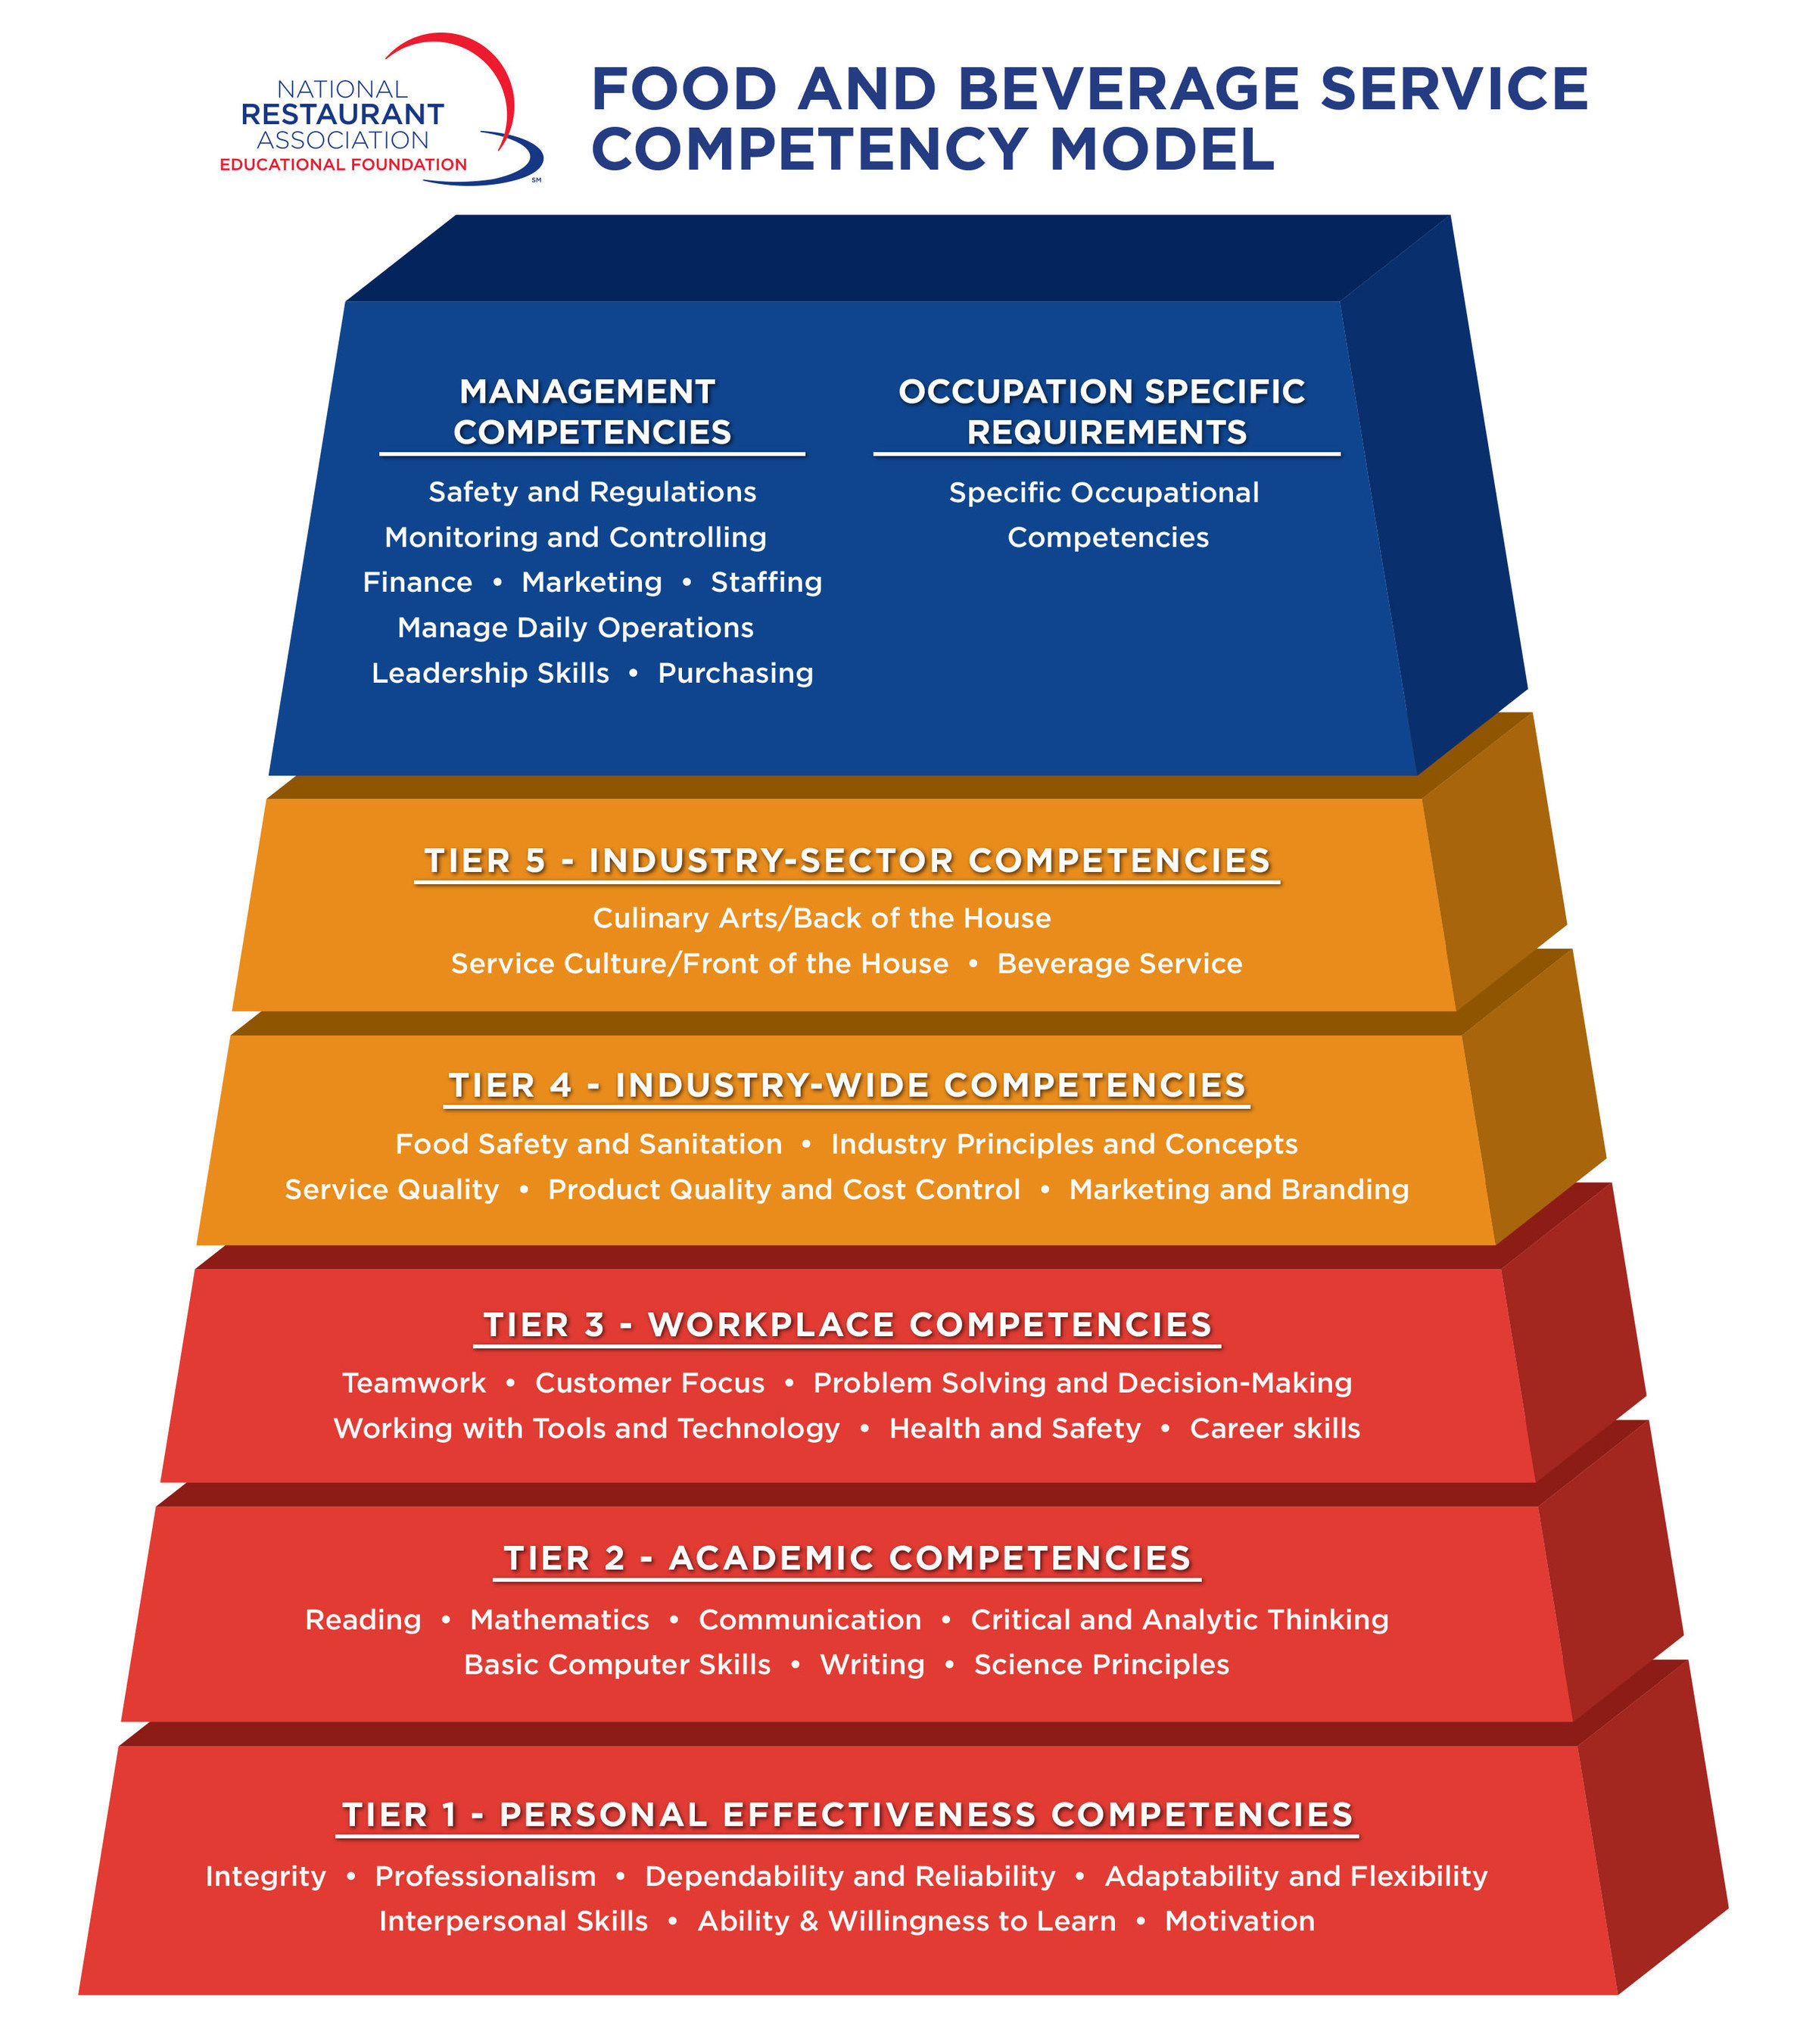 National Restaurant Association Educational Foundation Develops First-Ever Food and Beverage Service Competency Model